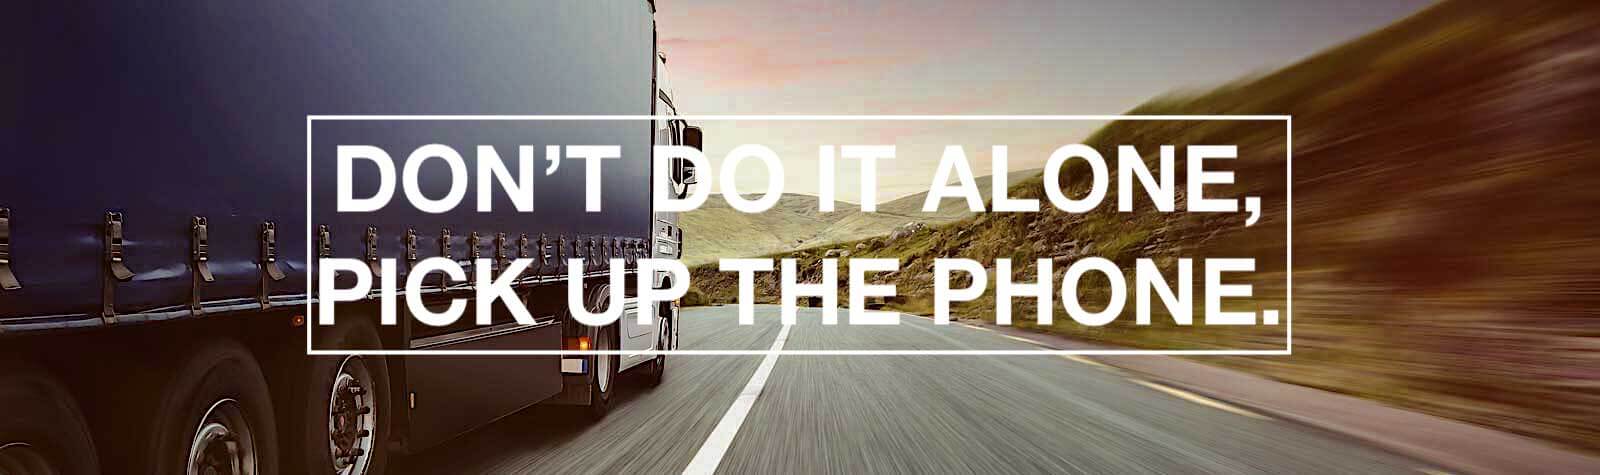 Don't do it alone, pick up the phone truck slogan